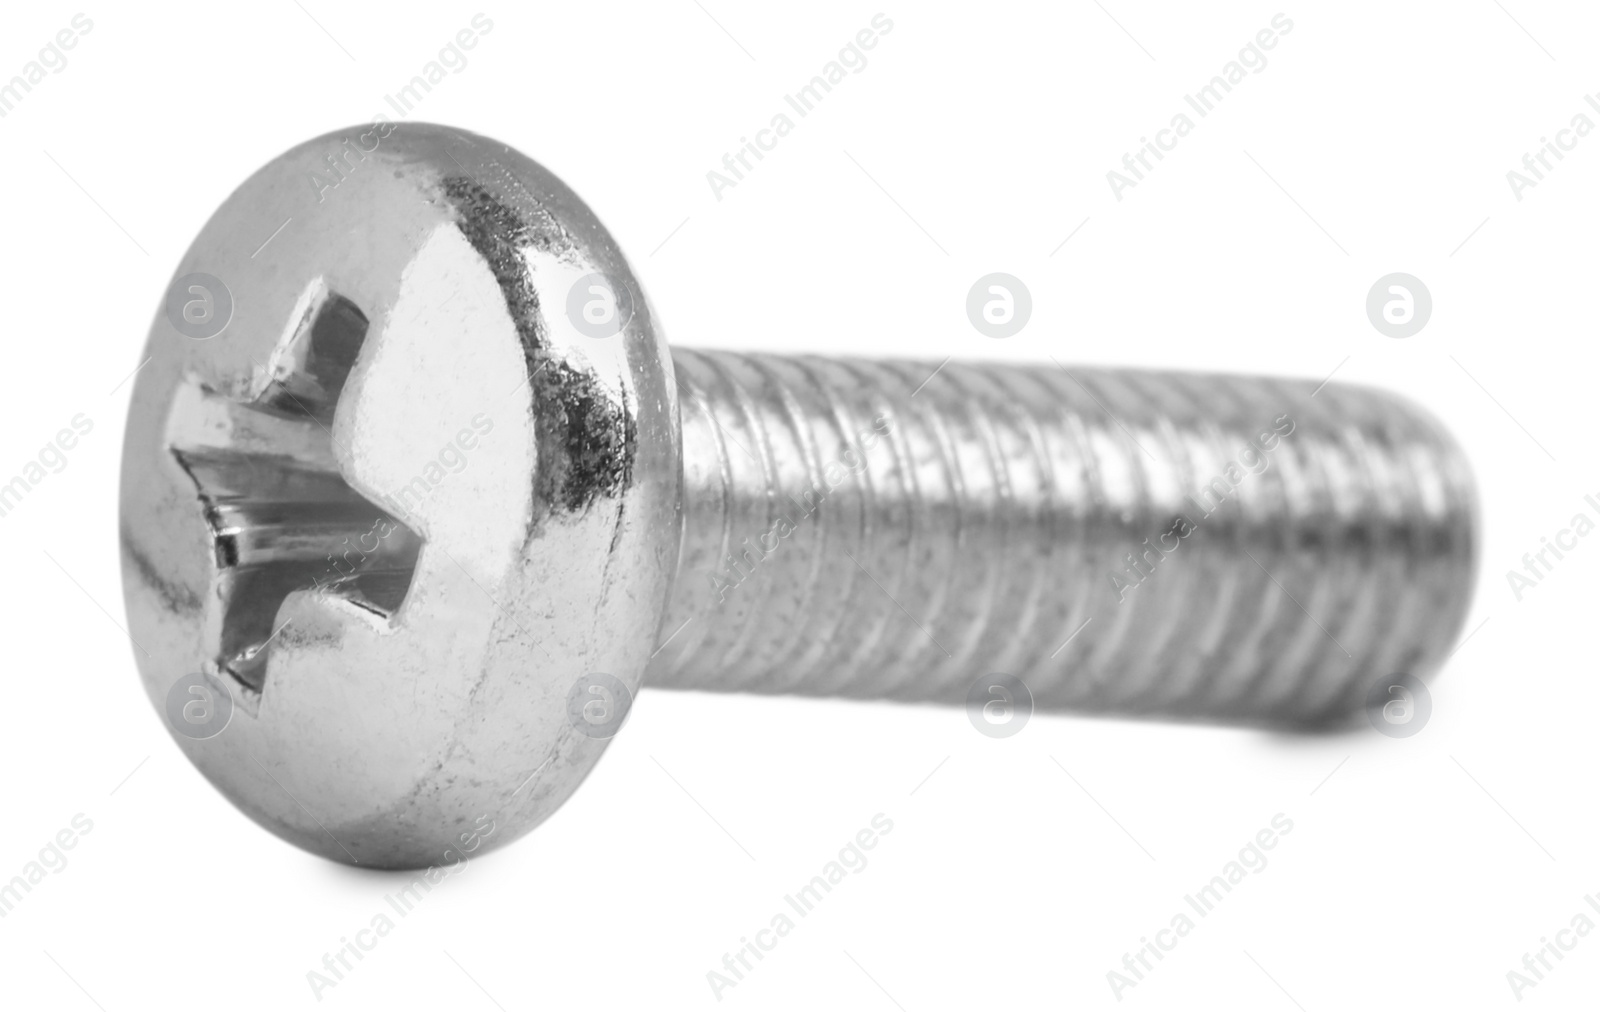 Photo of One metal machine screw bolt isolated on white